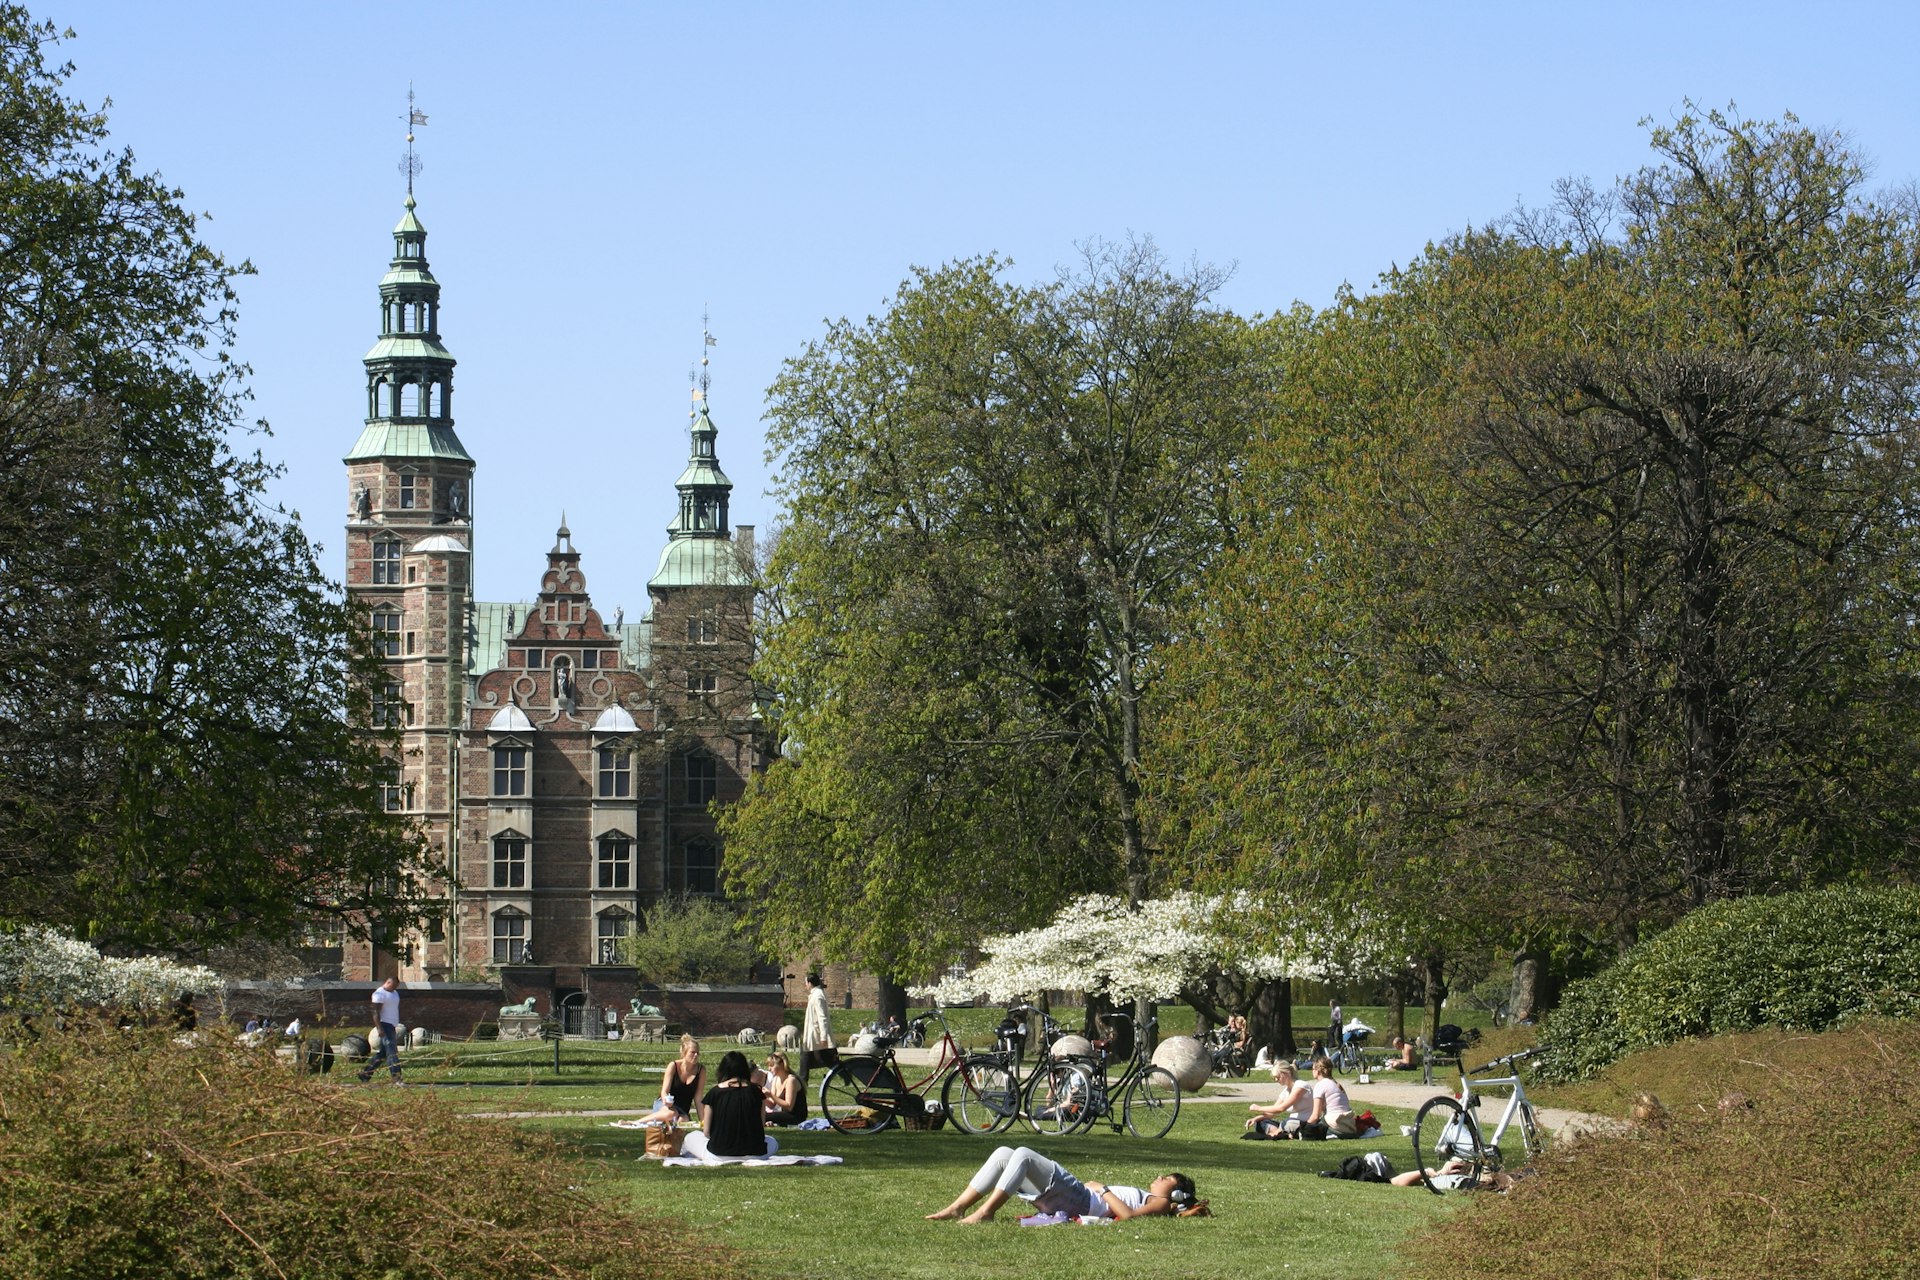 People relaxing in a park in front of a building with two towers 